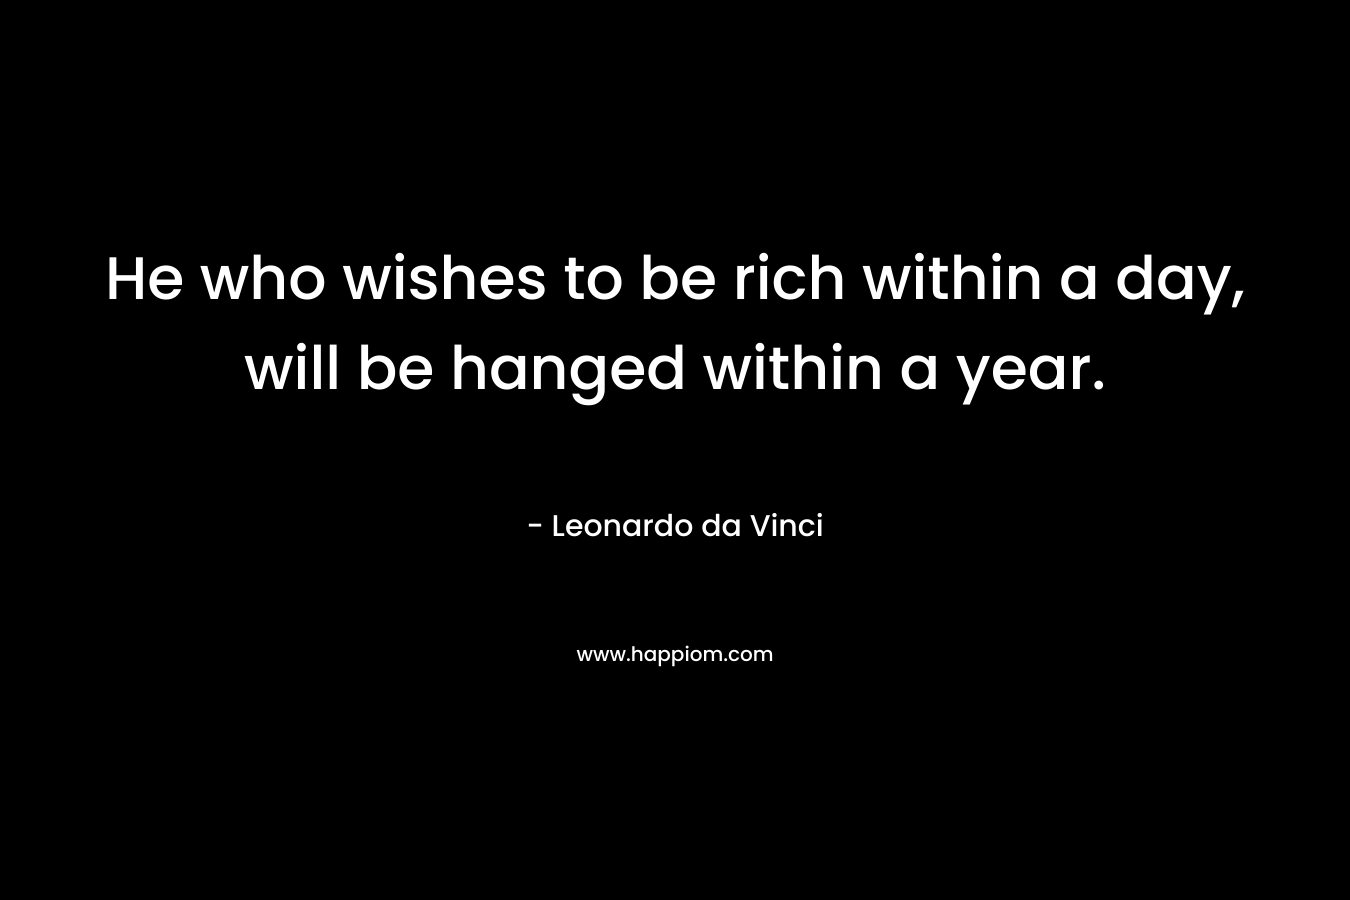 He who wishes to be rich within a day, will be hanged within a year.